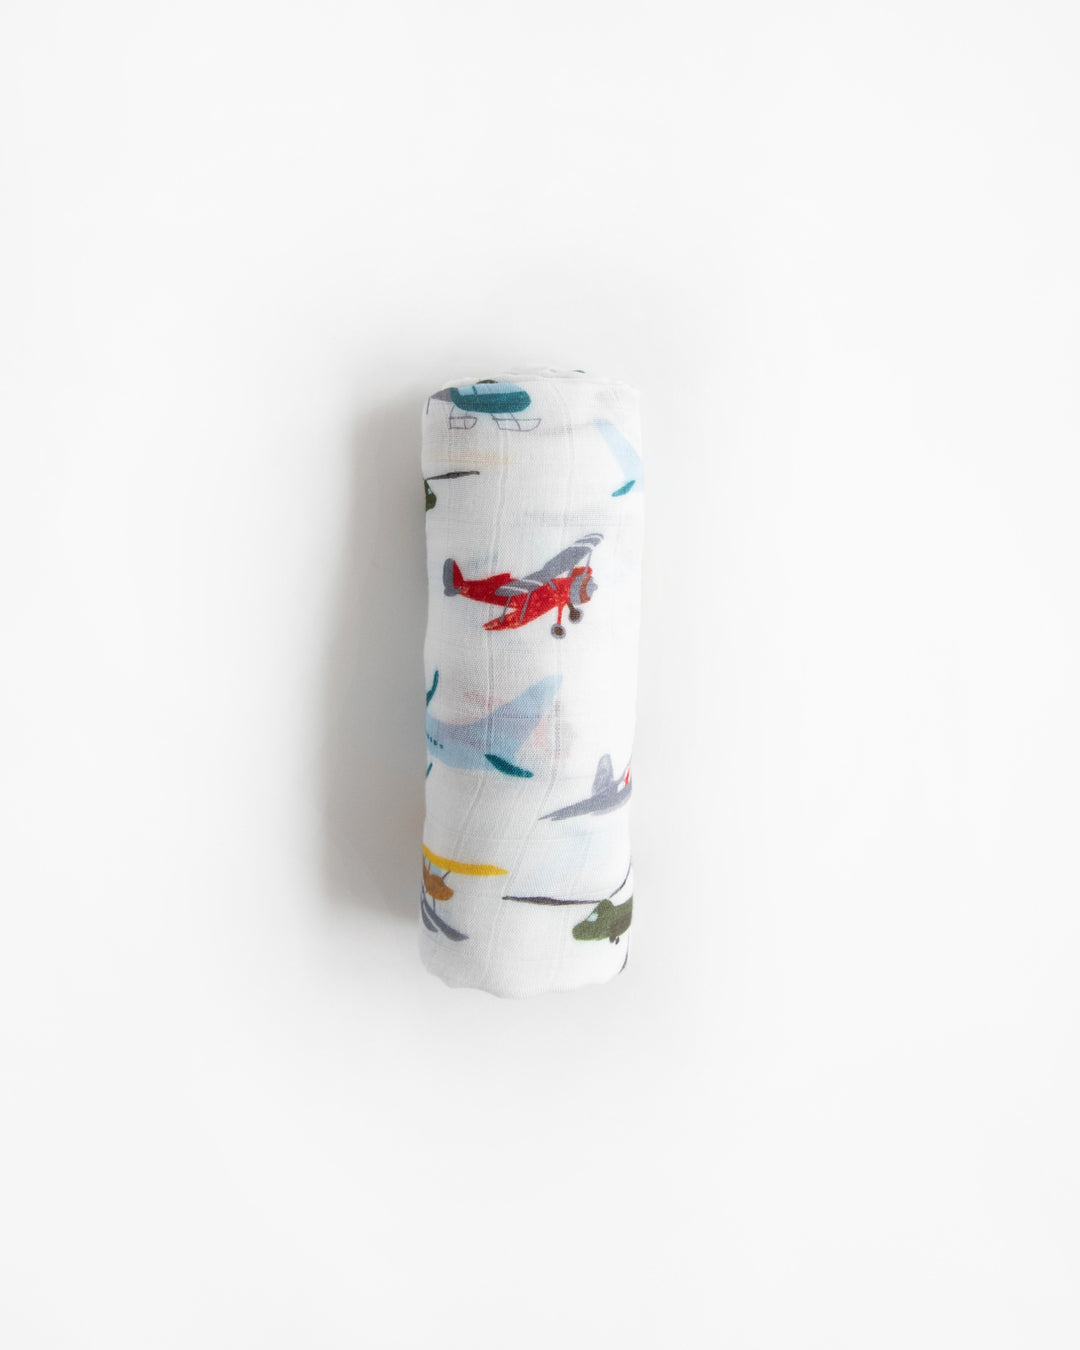 Deluxe Muslin Swaddle Blanket - Air Show